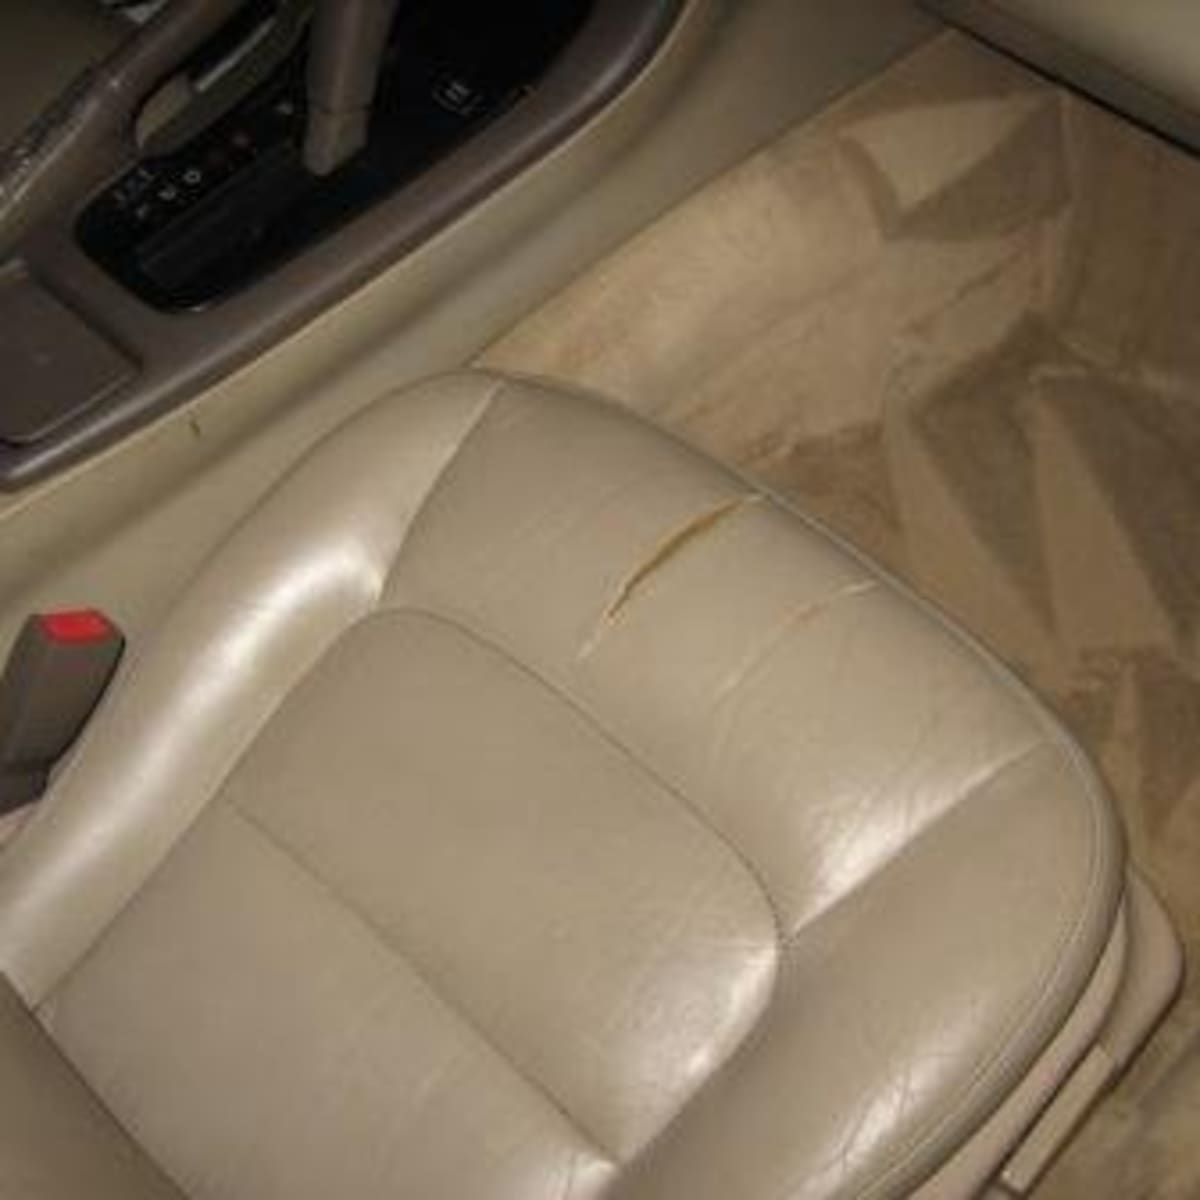 To Repair Leather And Vinyl Car Seats, How Much To Repair Small Tear In Leather Car Seat